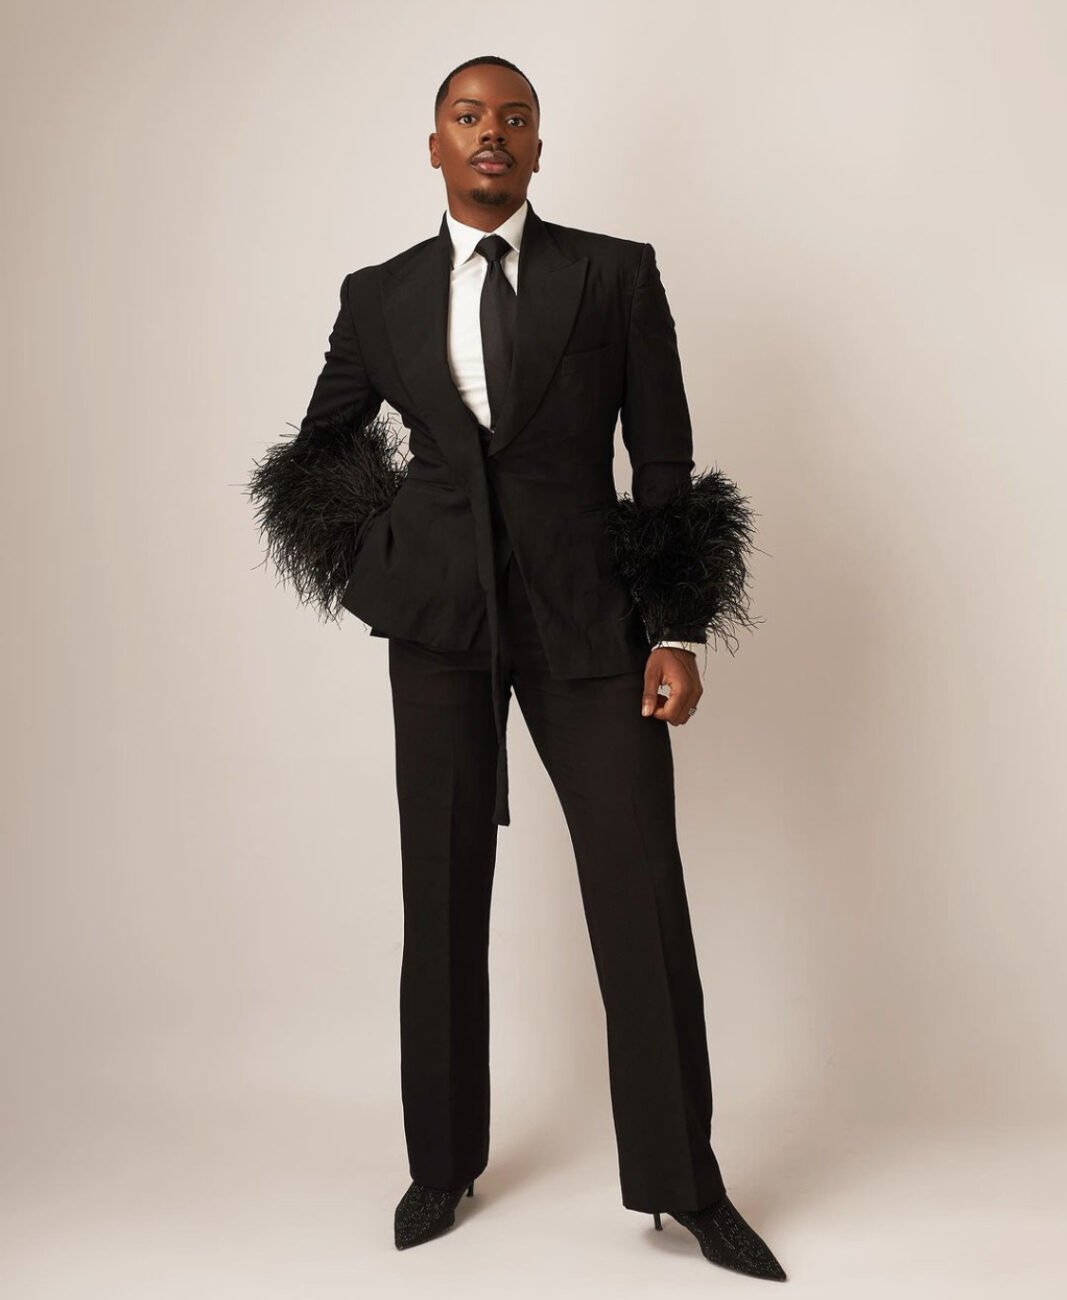 Enioluwa Adeoluwa in a black suit with feather covered sleeves.